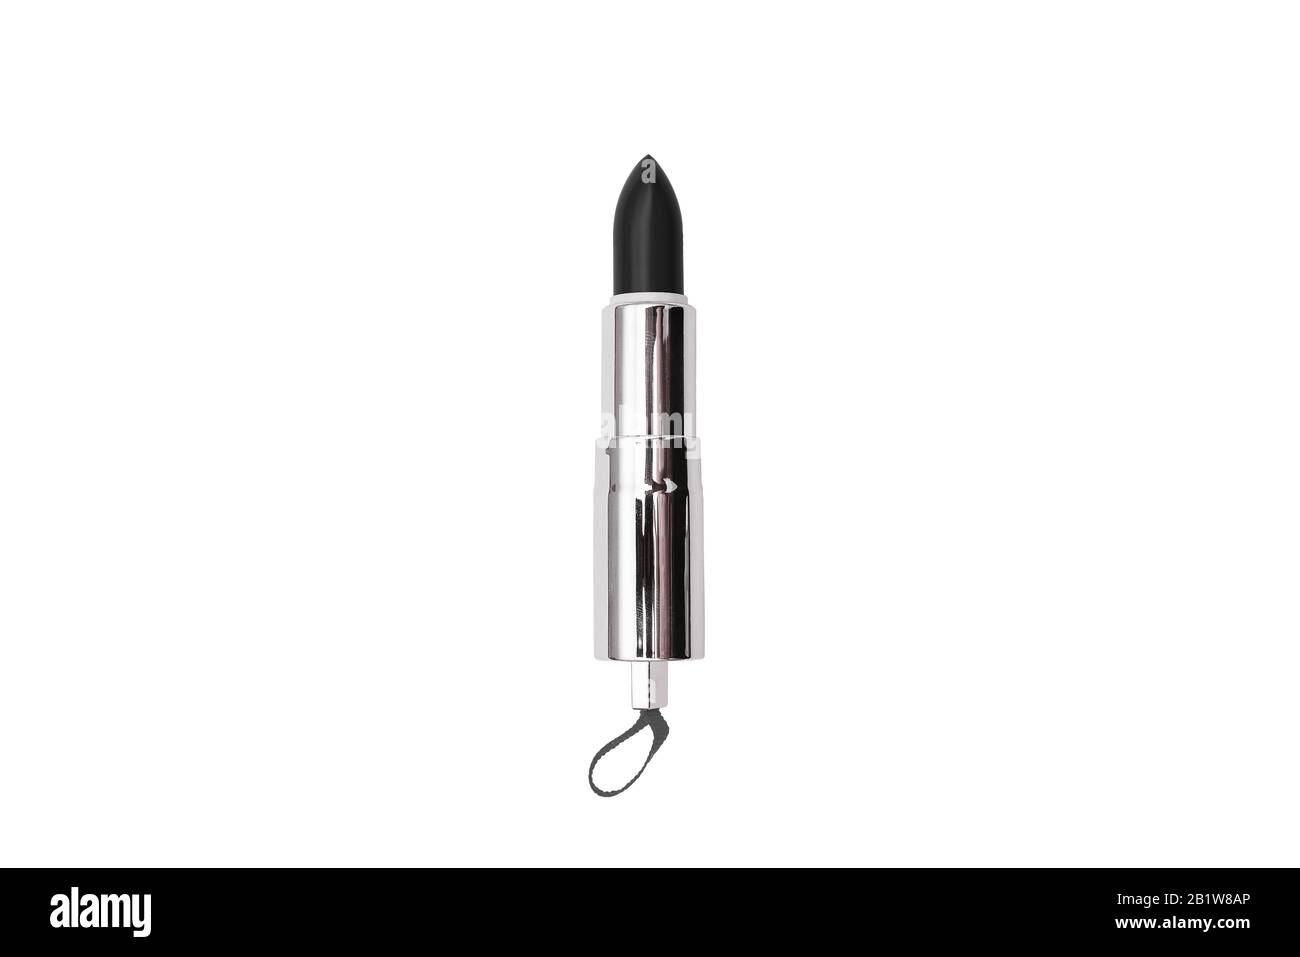 Lipstick black. Everyday cosmetic product. Women's makeup tools. Glamor and fashion Stock Photo